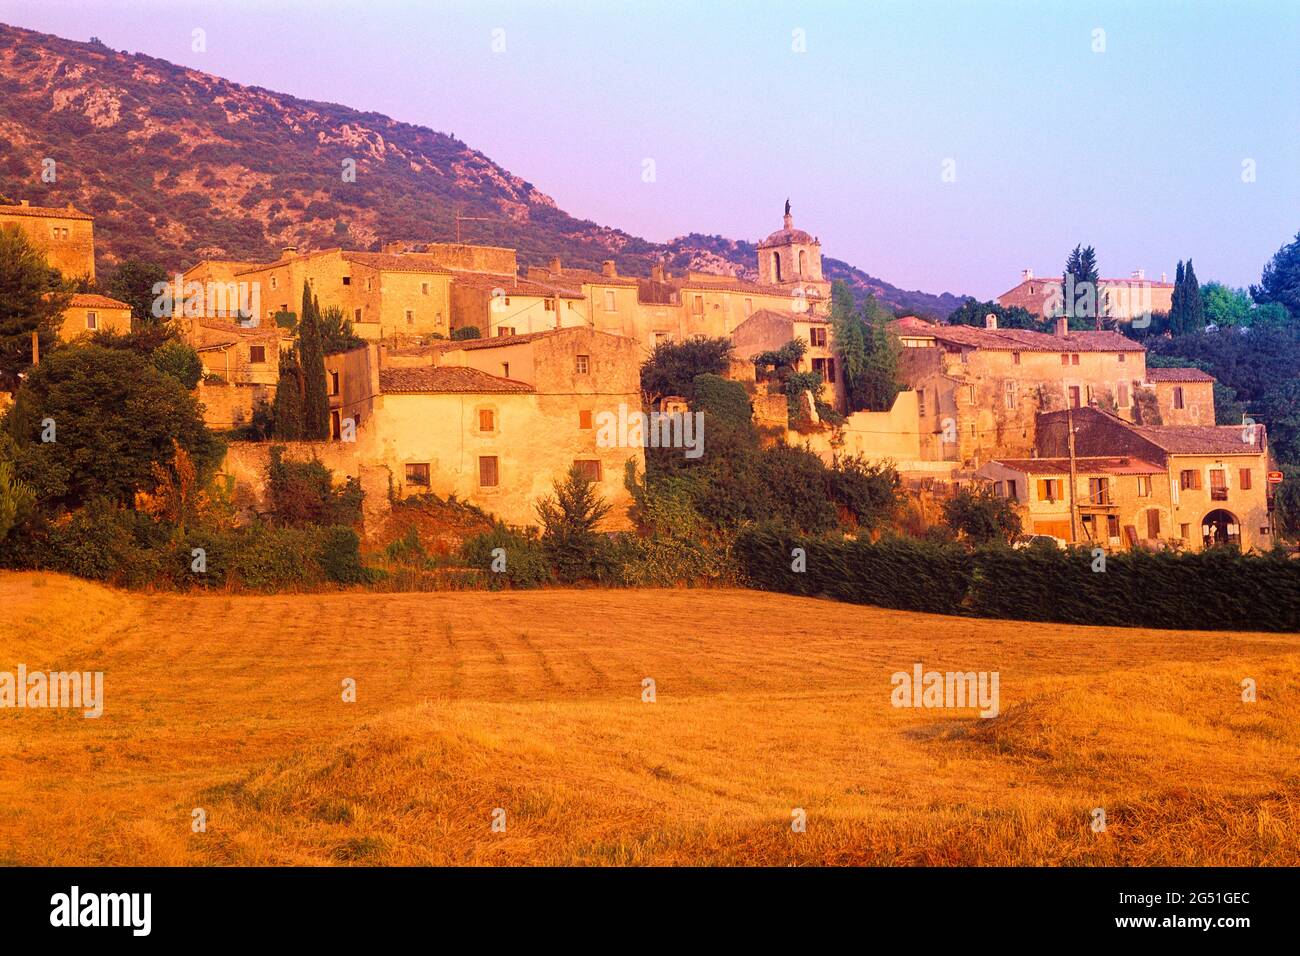 Field and houses in village at sunset, Baubec, Provence, France Stock Photo